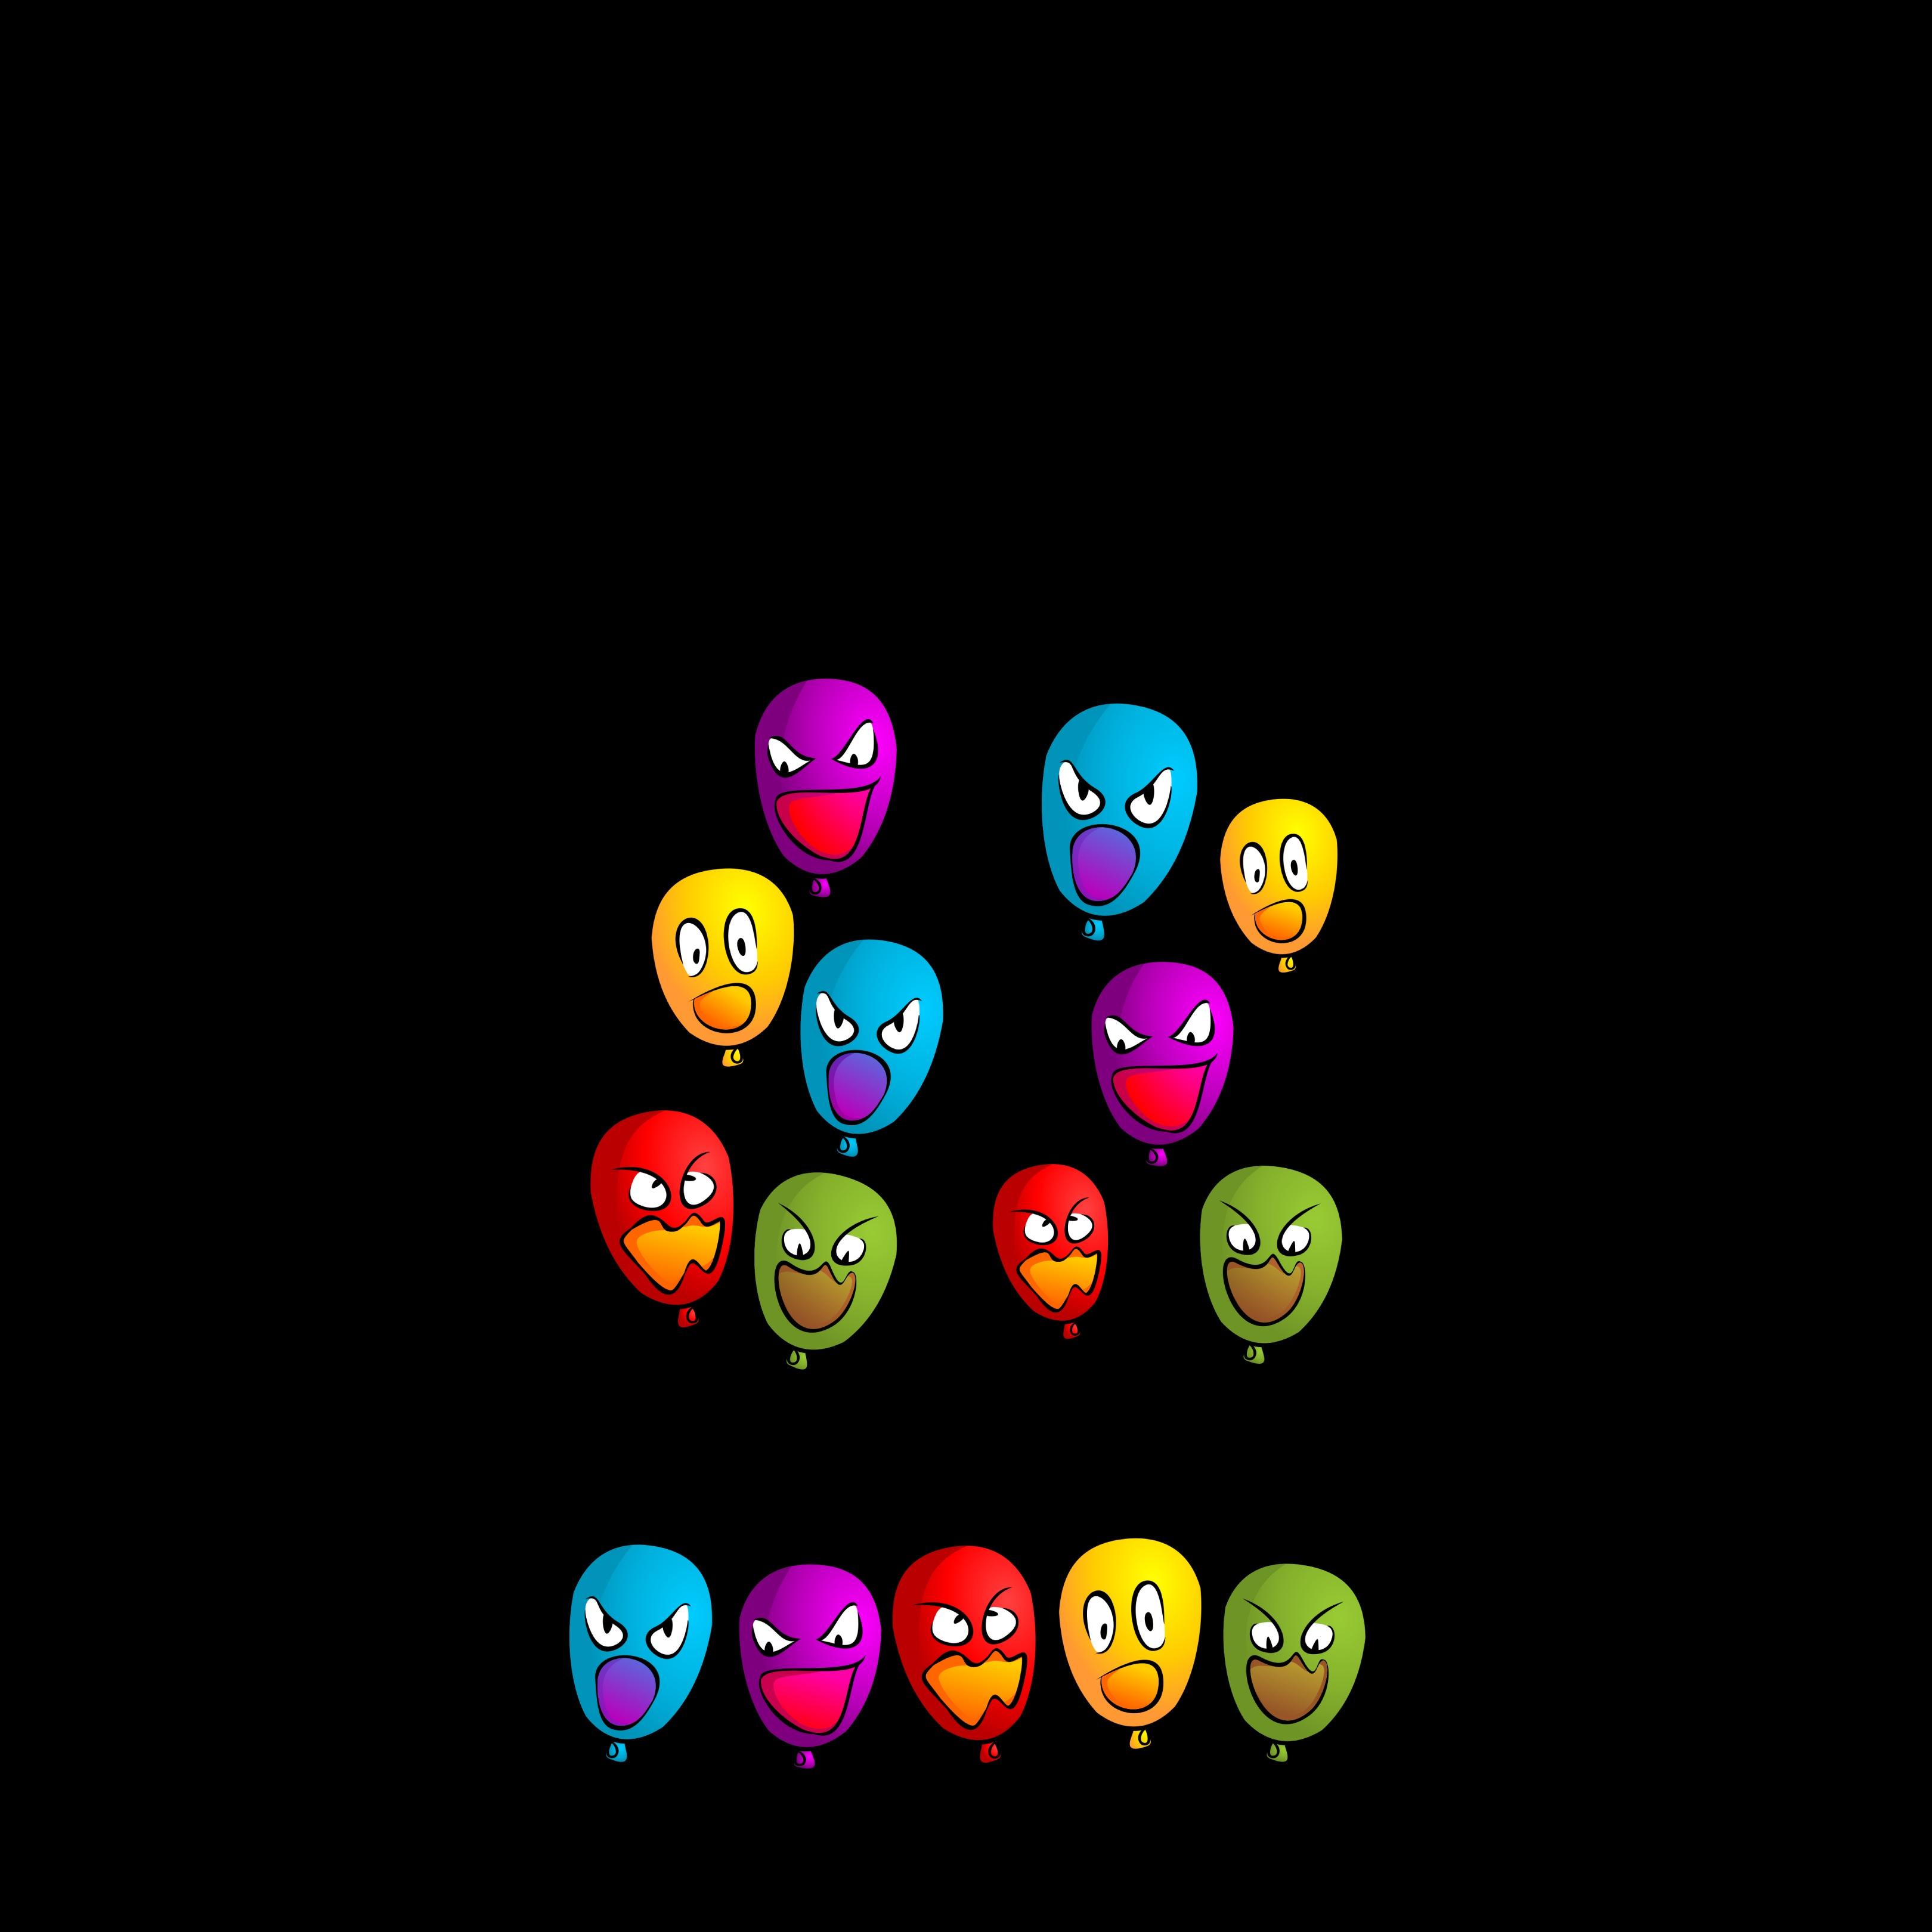 Download wallpaper 3240x3240 balloons, emoticons, colorful